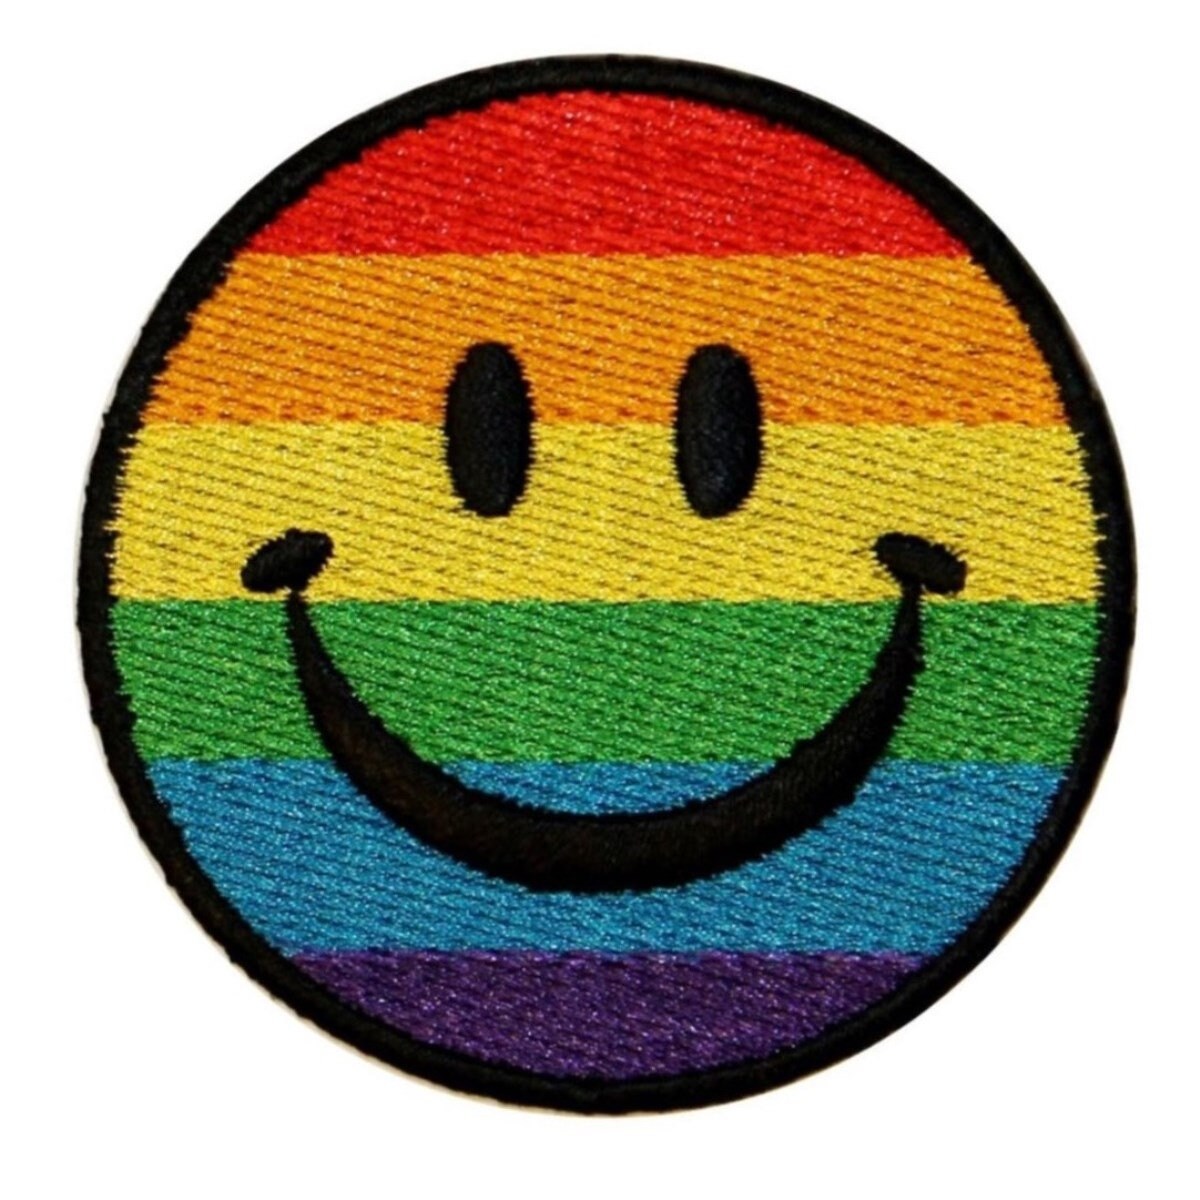 Cry Baby // Smiley Face DIY Embroidered Patch Applique Mental